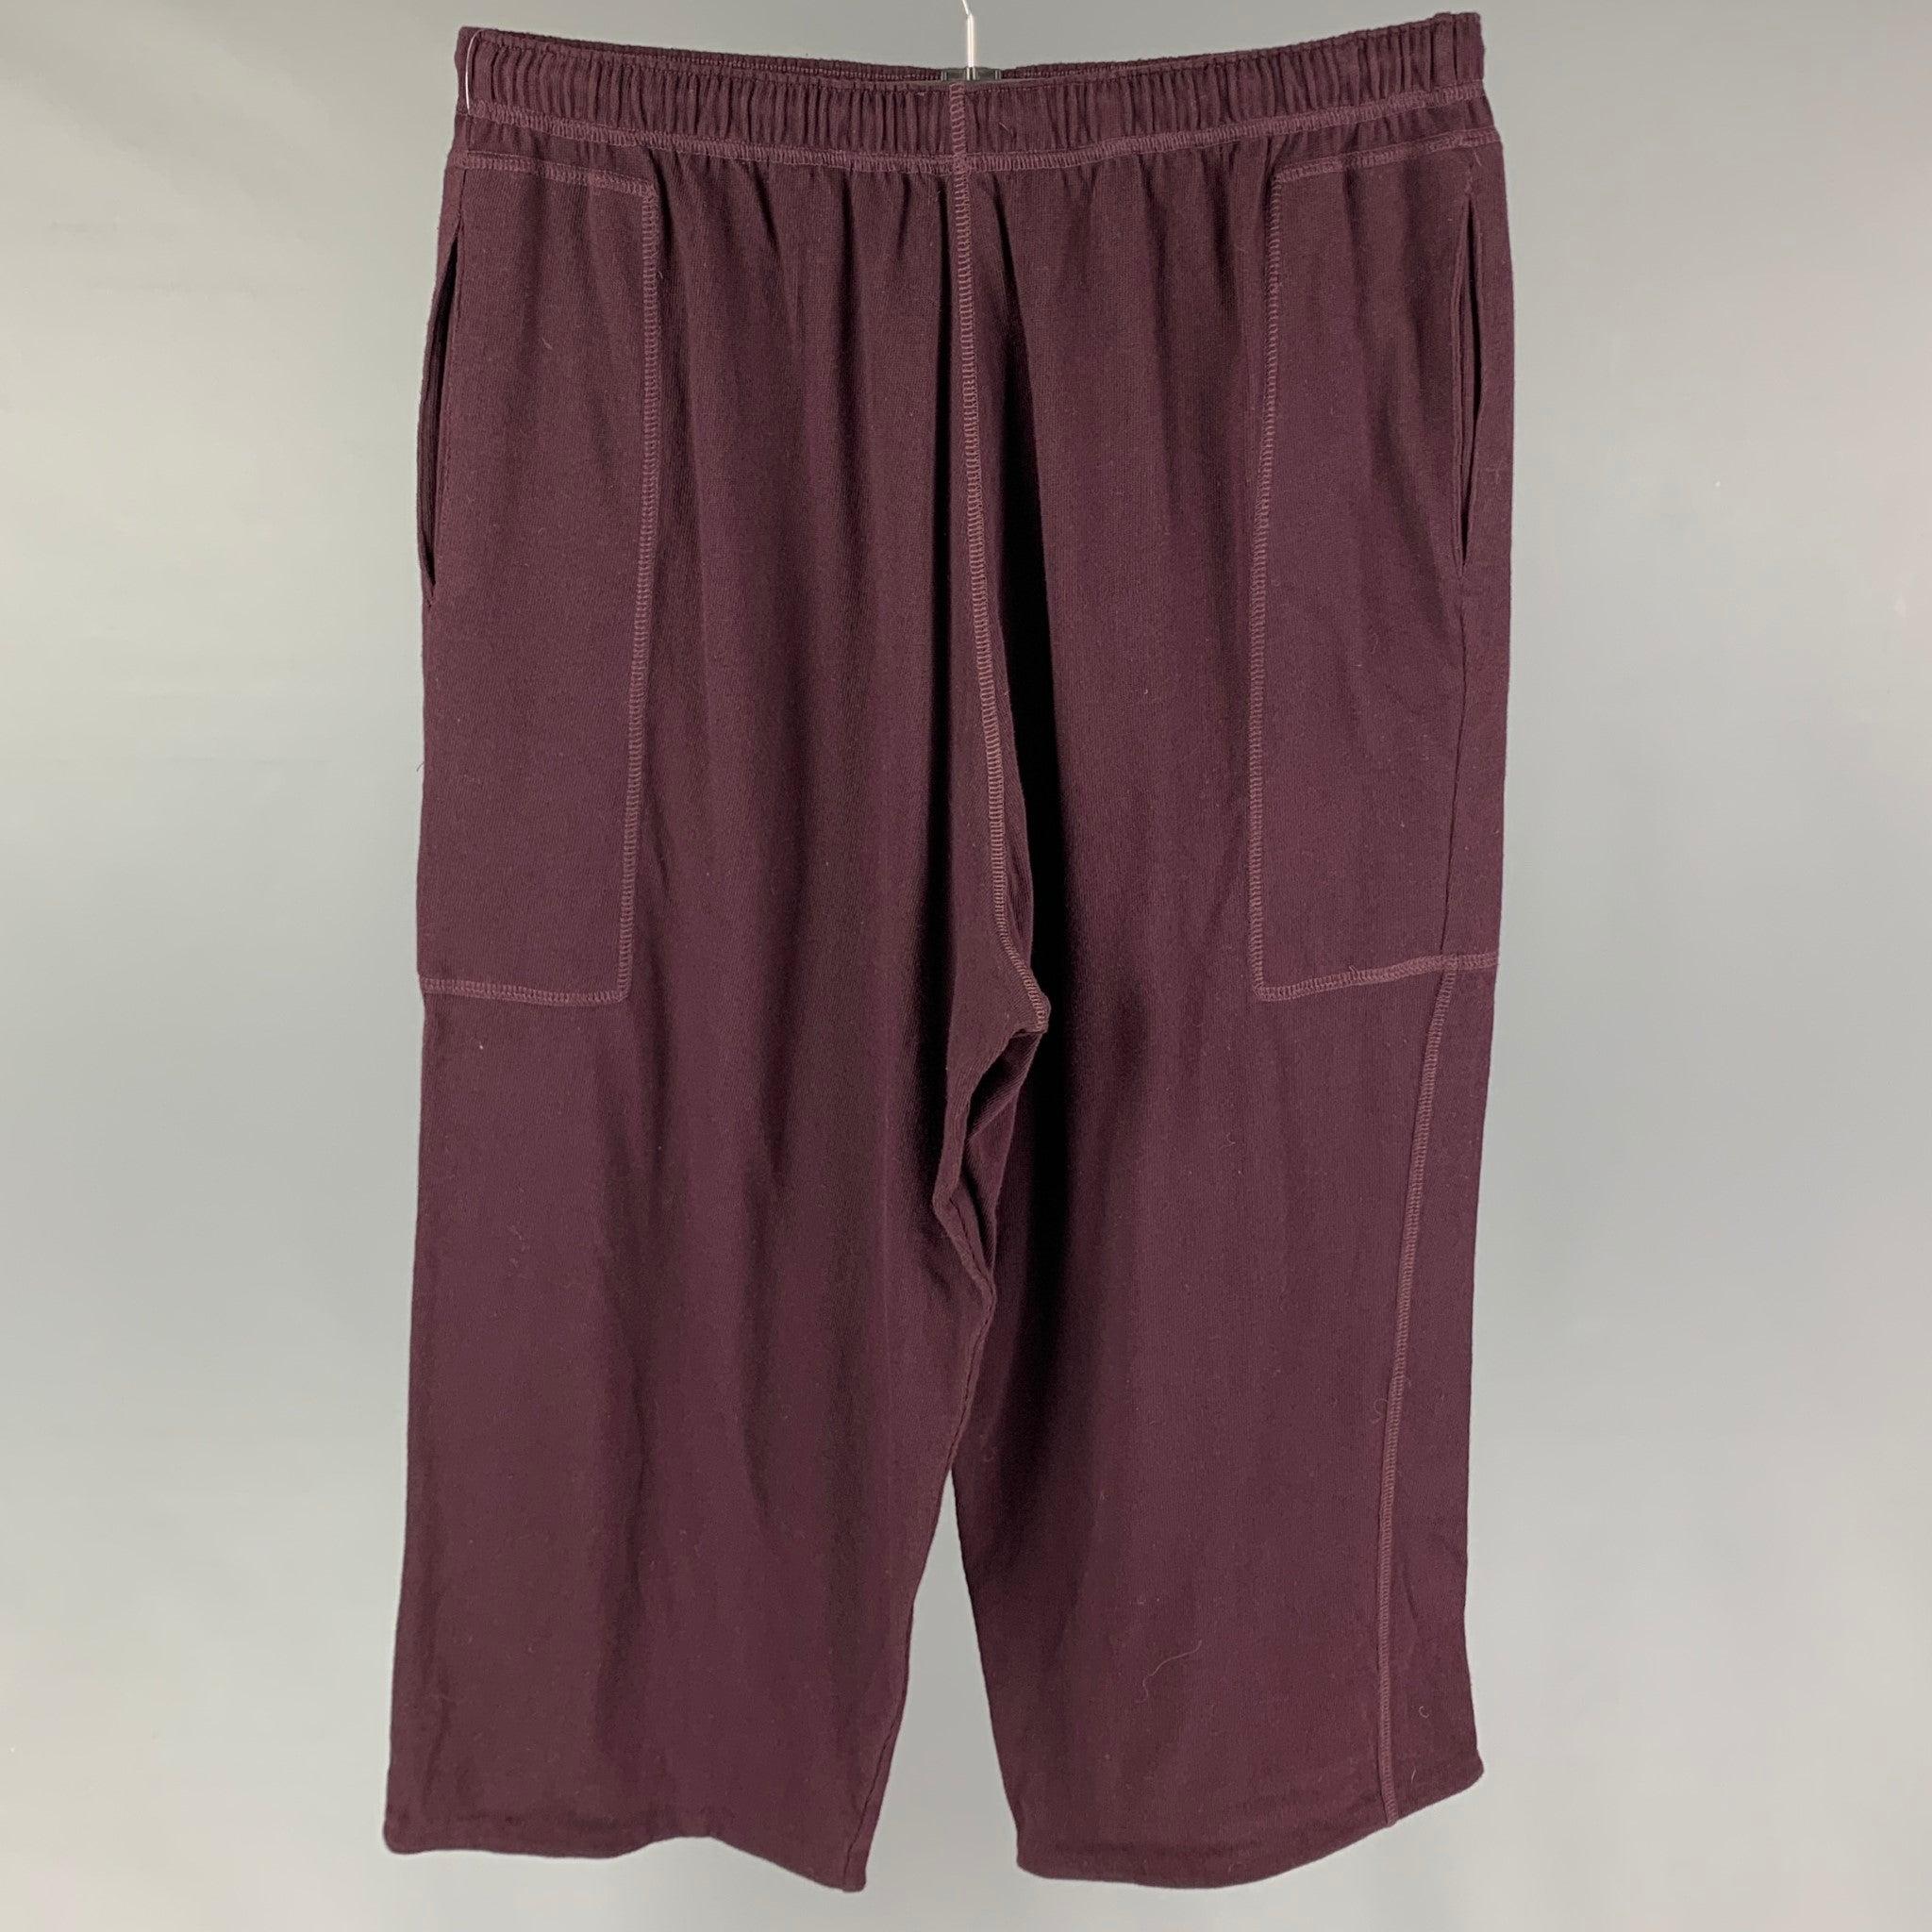 PAUL SMITH pants comes in a burgundy cotton featuring a loose fit, cropped, and a elastic waist. Made in England.
Very Good
Pre-Owned Condition. 

Marked:   L  

Measurements: 
  Waist: 30 inches  Rise: 16.5 inches  Inseam: 23 inches 
  
  
